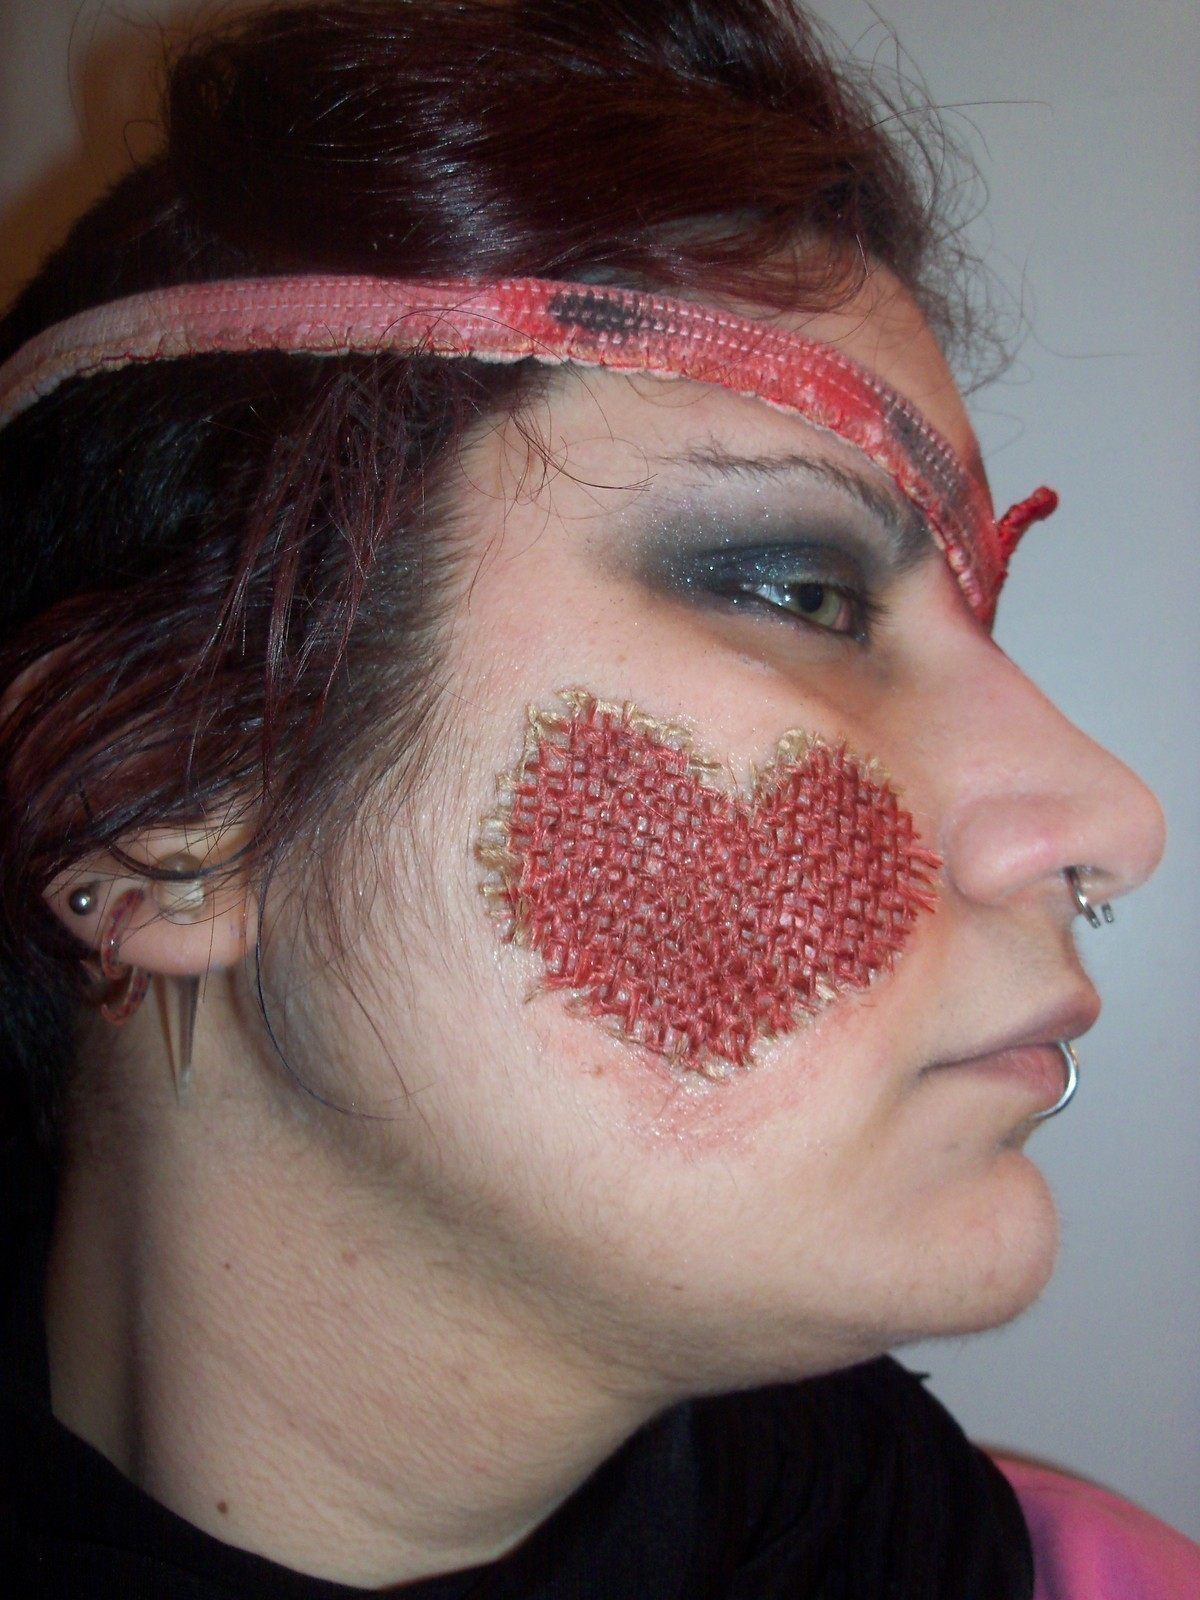 Heart Eye Makeup Bloody Heart Eye Patch Fake Skin Makeup Techniques And Sewing On